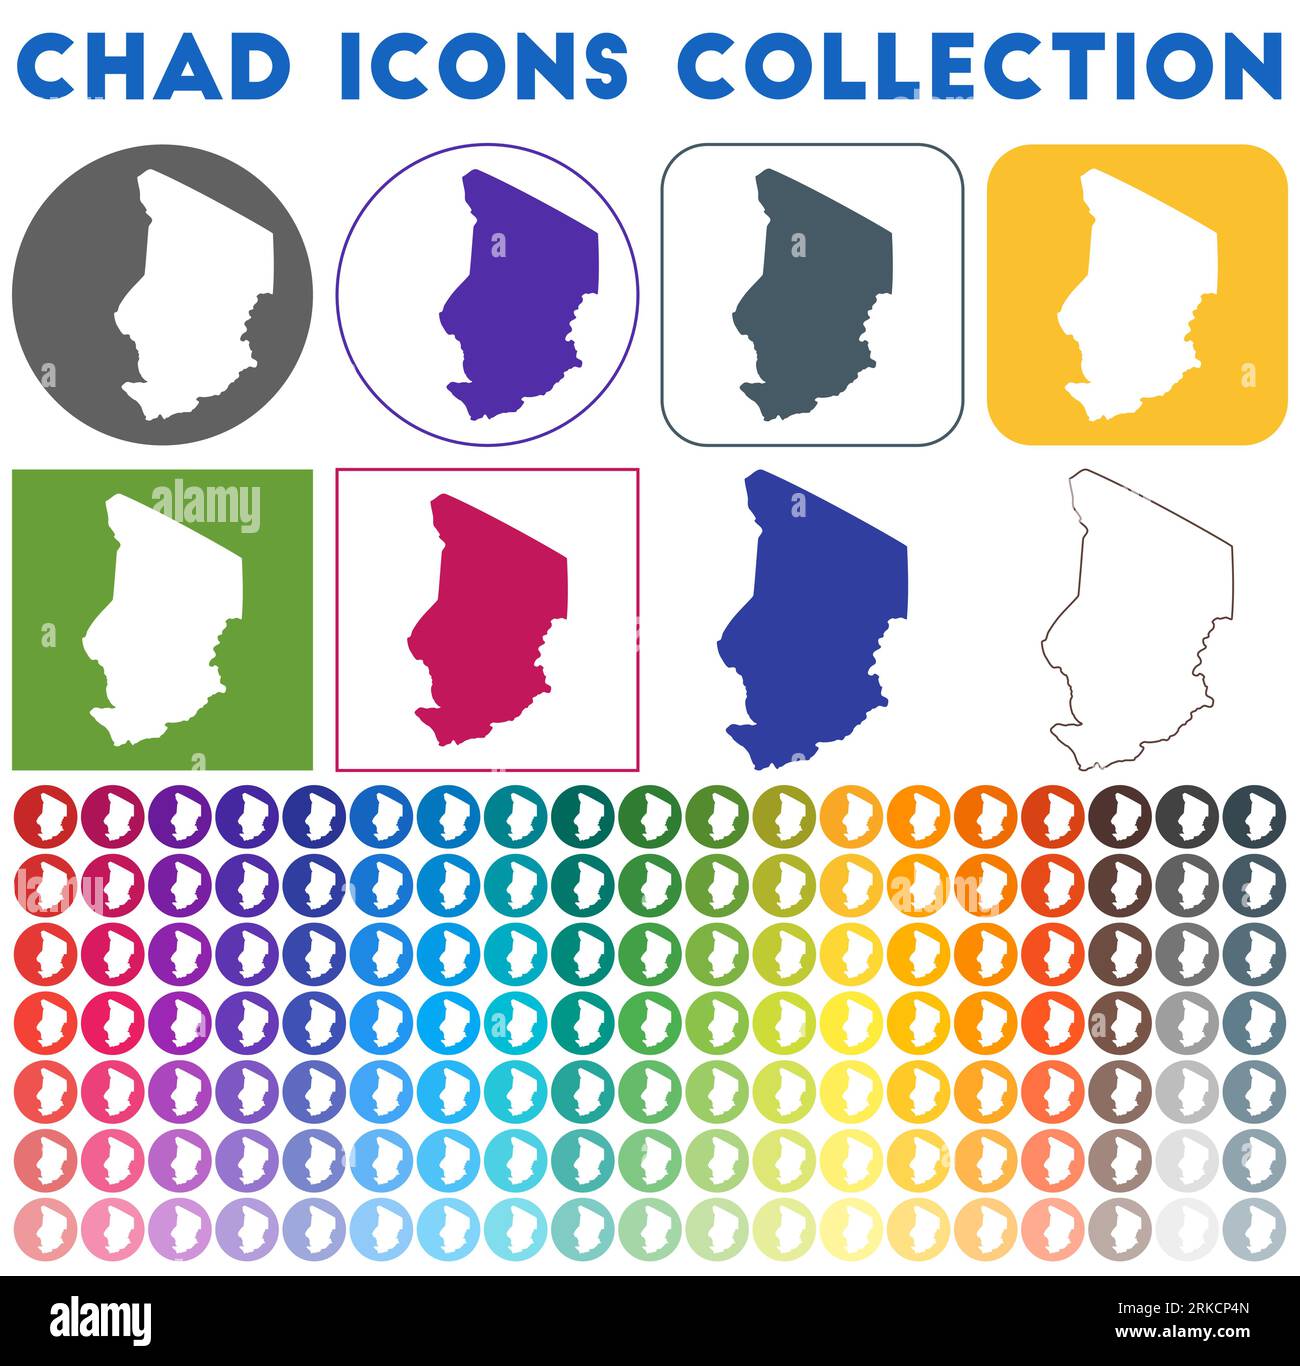 Chad icons collection. Bright colourful trendy map icons. Modern Chad badge with country map. Vector illustration. Stock Vector